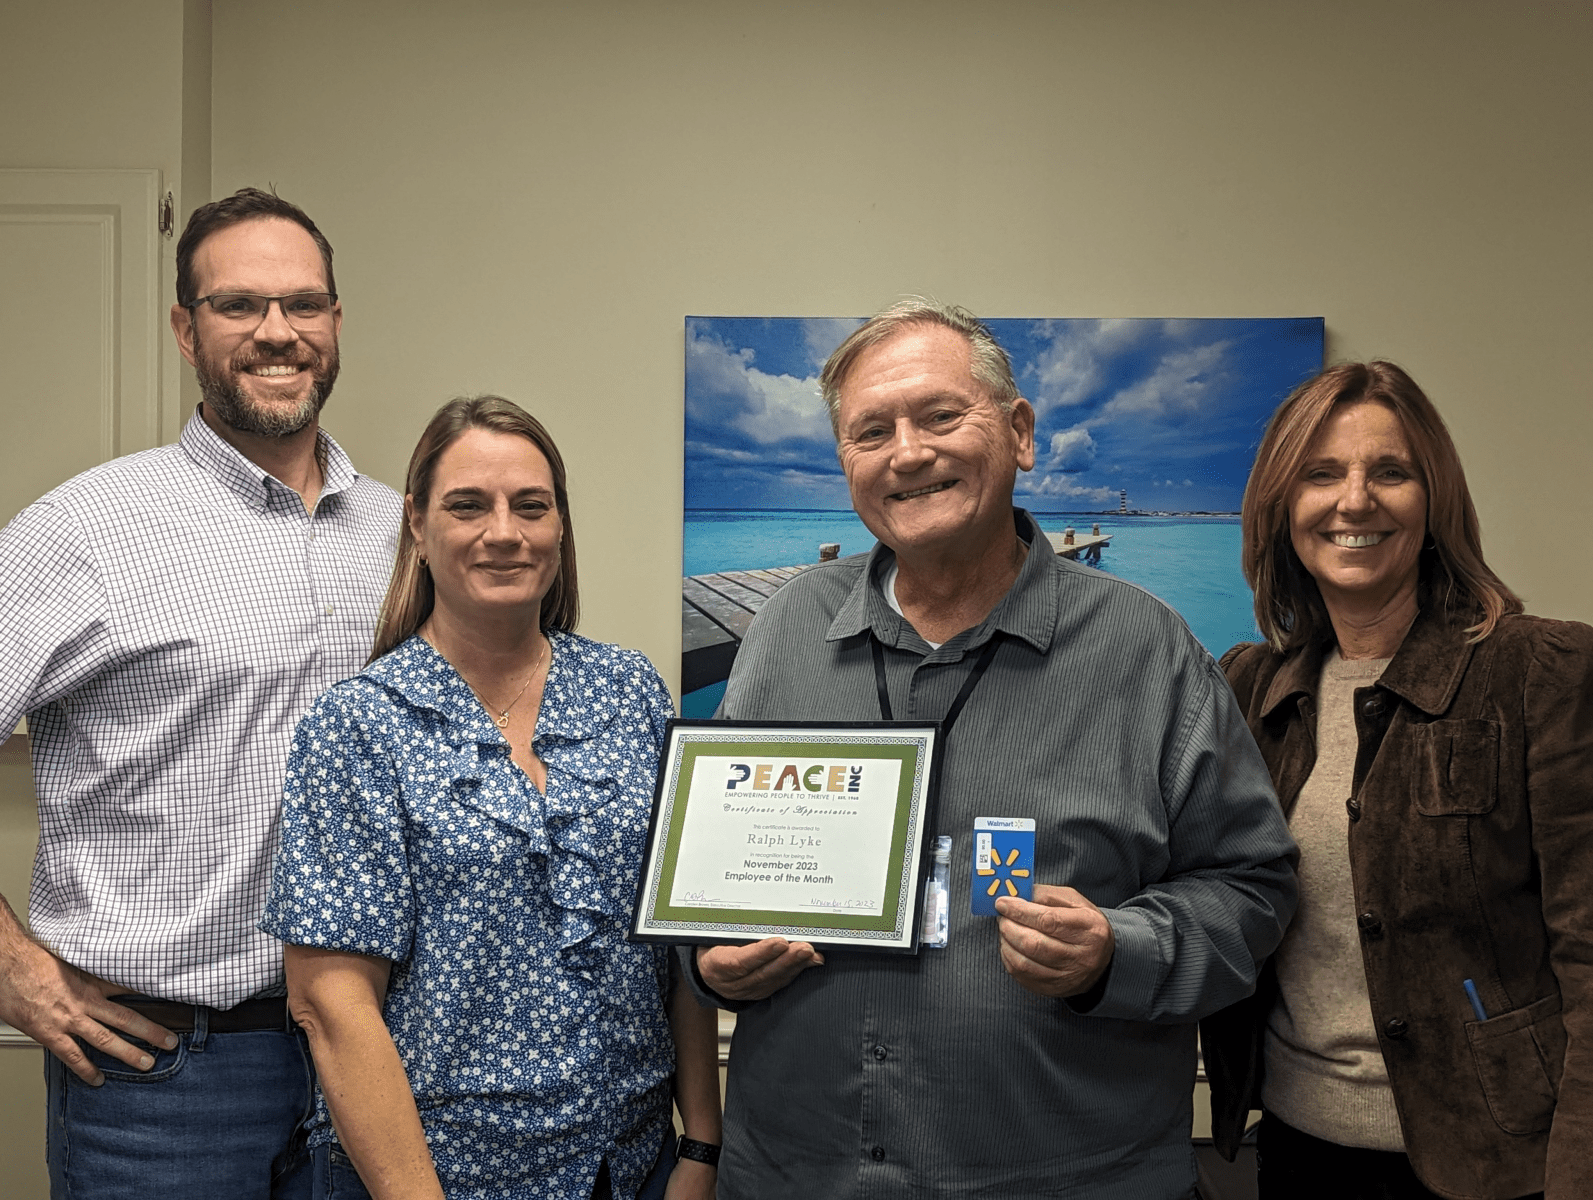 Employee of the Month Ralph Lyke, with (left to right) VP of Operations & Strategy Todd Goehle, Free Tax Prep Program Manager Sharon Thompson, and Executive Director Carolyn Brown.